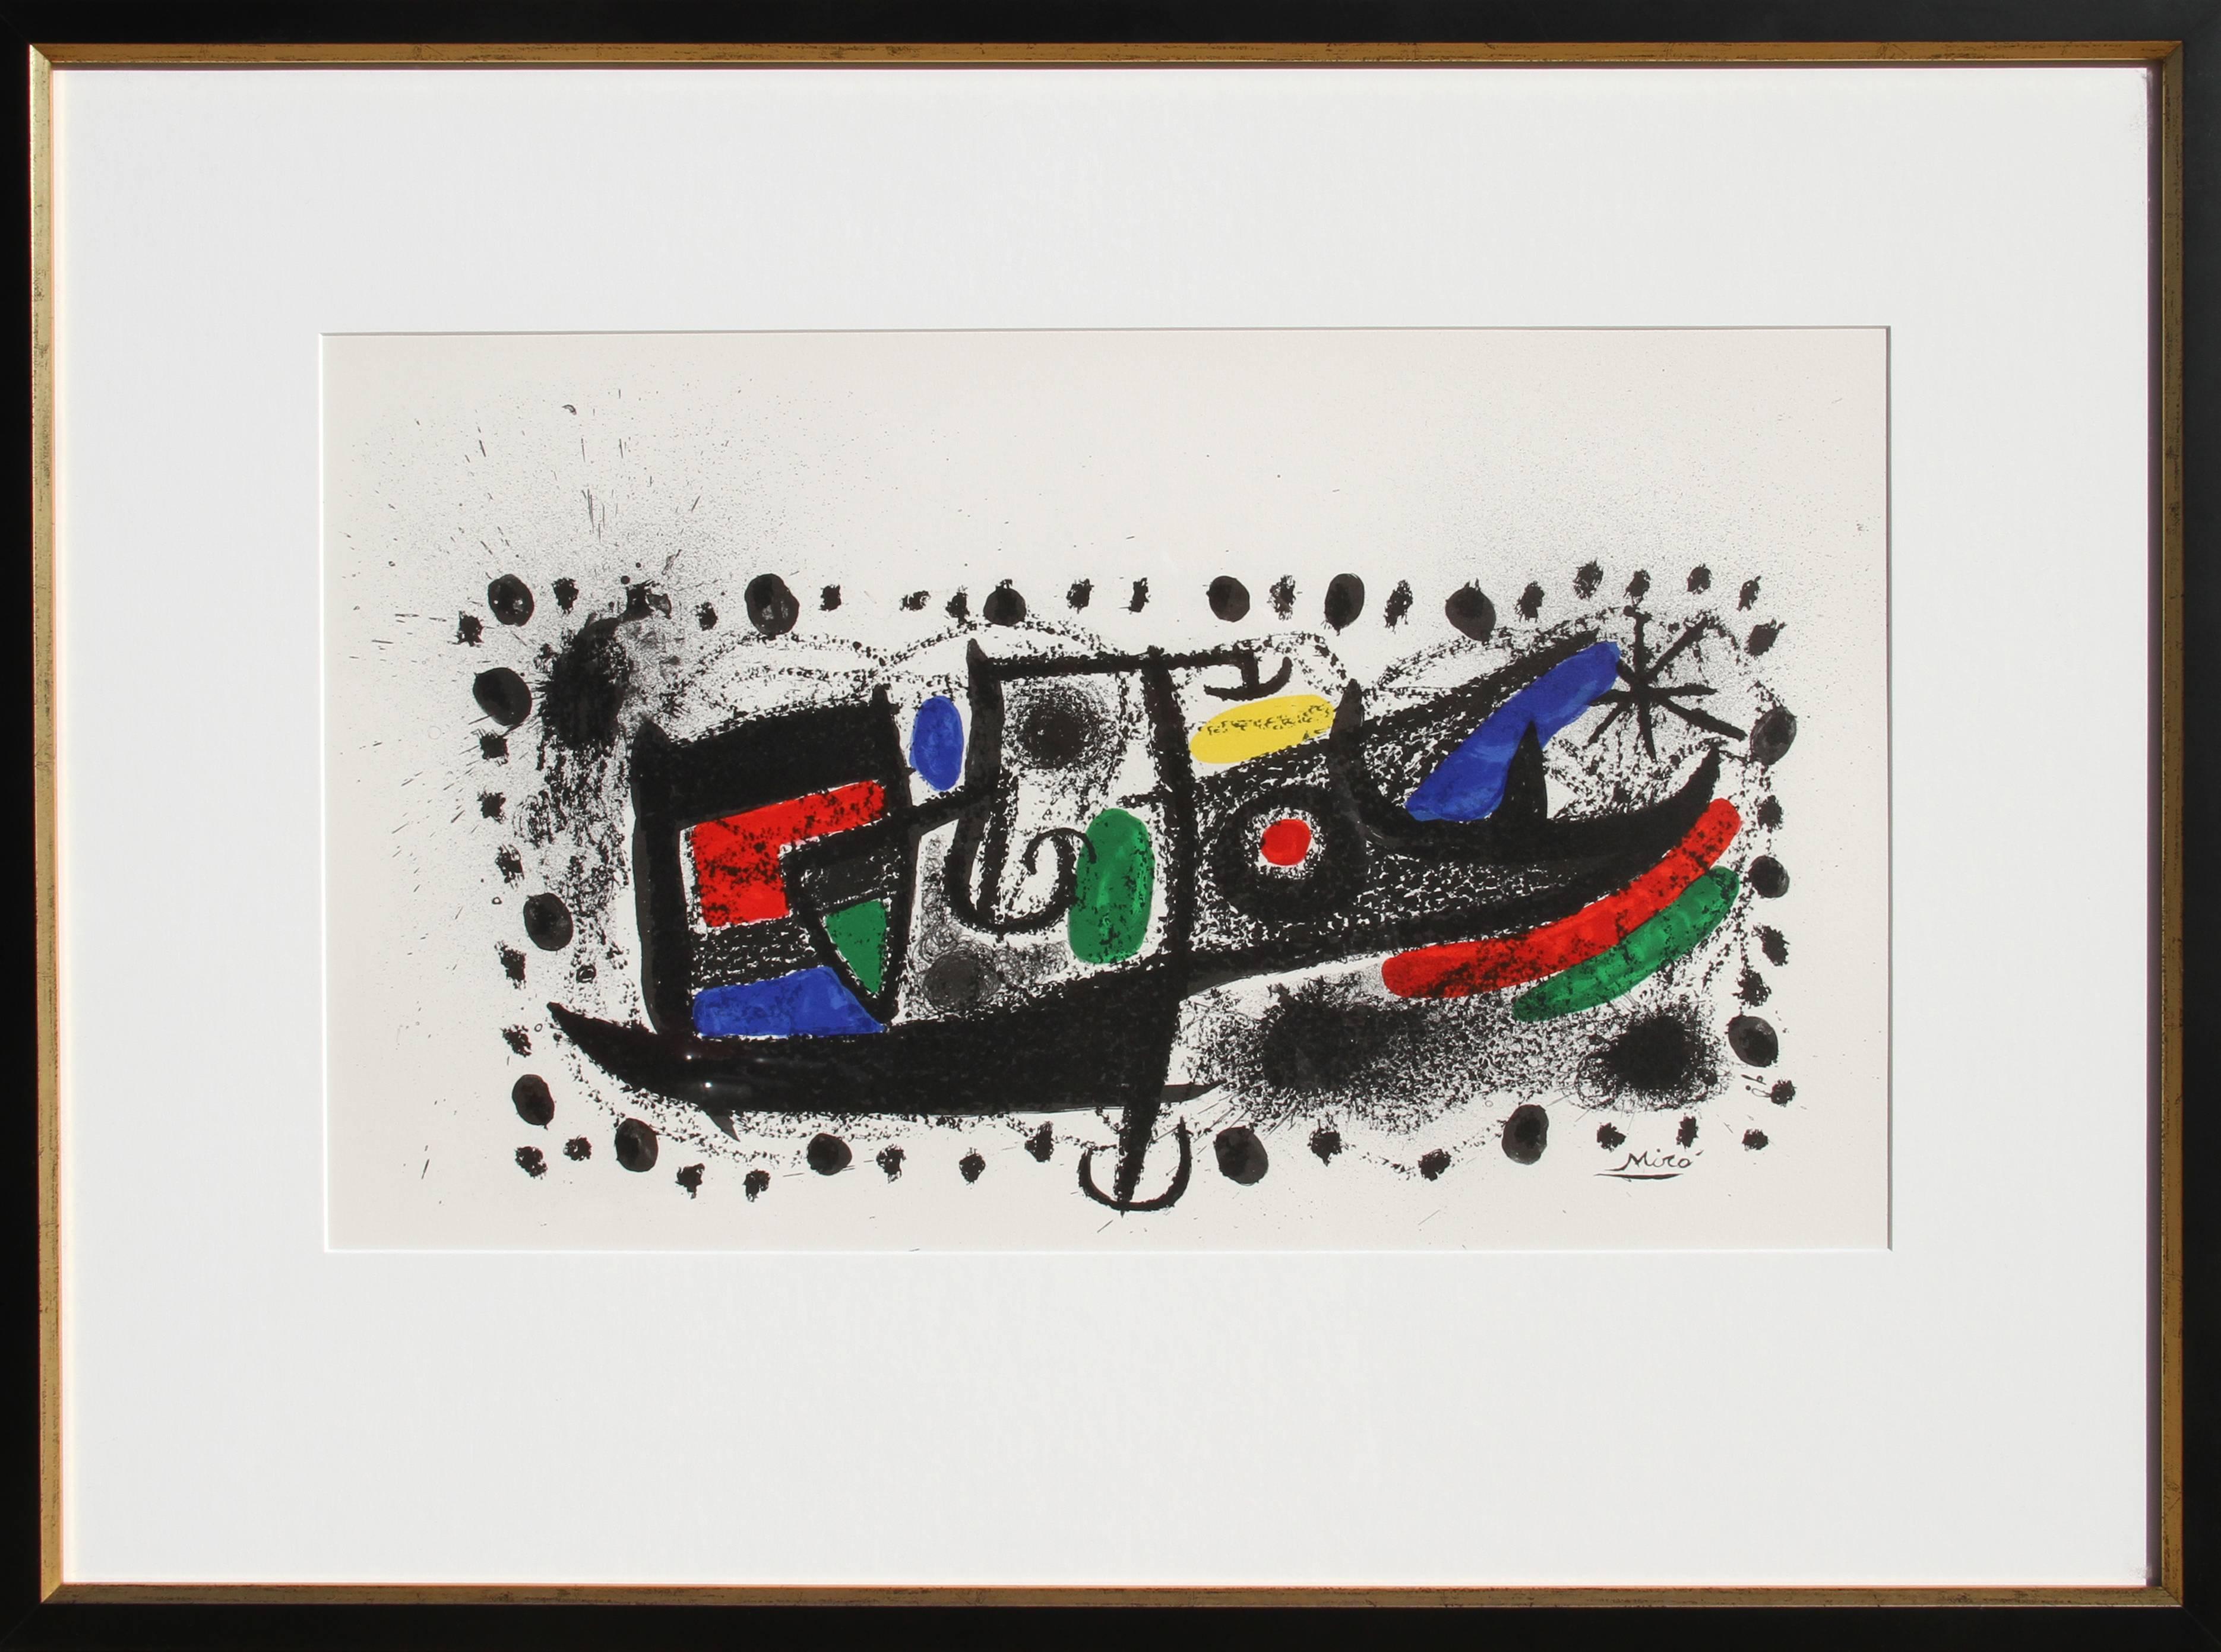 Artist: Joan Miro, Spanish (1893 - 1983)
Title: Joan Miro und Katalonien
Year: 1969
Medium: Lithograph on Arches, signed in the plate
Size: 20 in. x 26 in. (50.8 cm x 66.04 cm)
Frame: 21 x 28.5 inches

Printer: La Poligrafia, S.A.
Publisher: